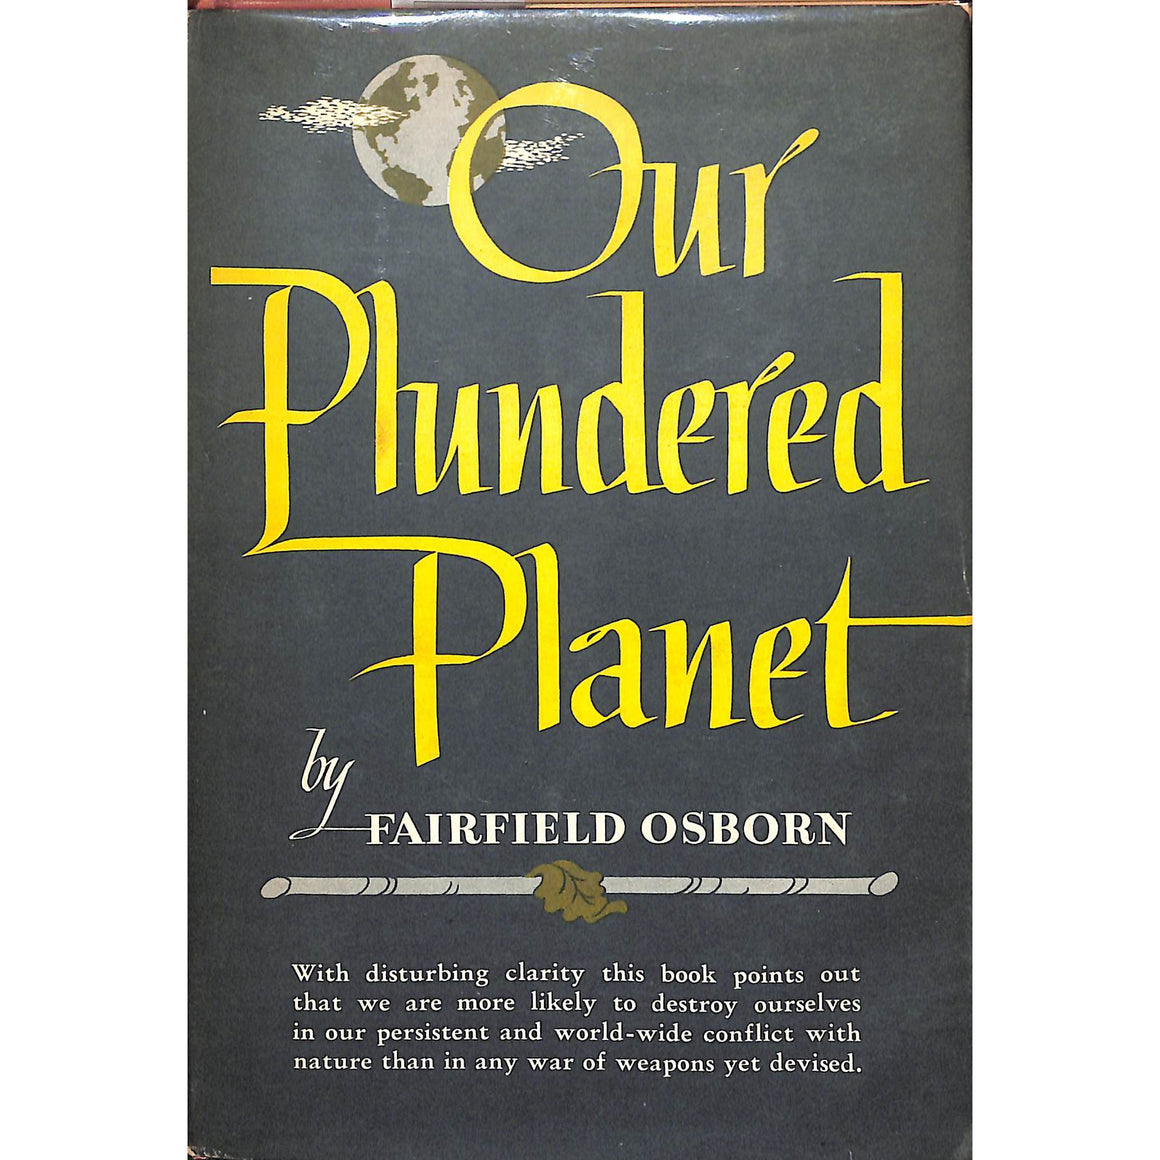 Our Plundered Planet